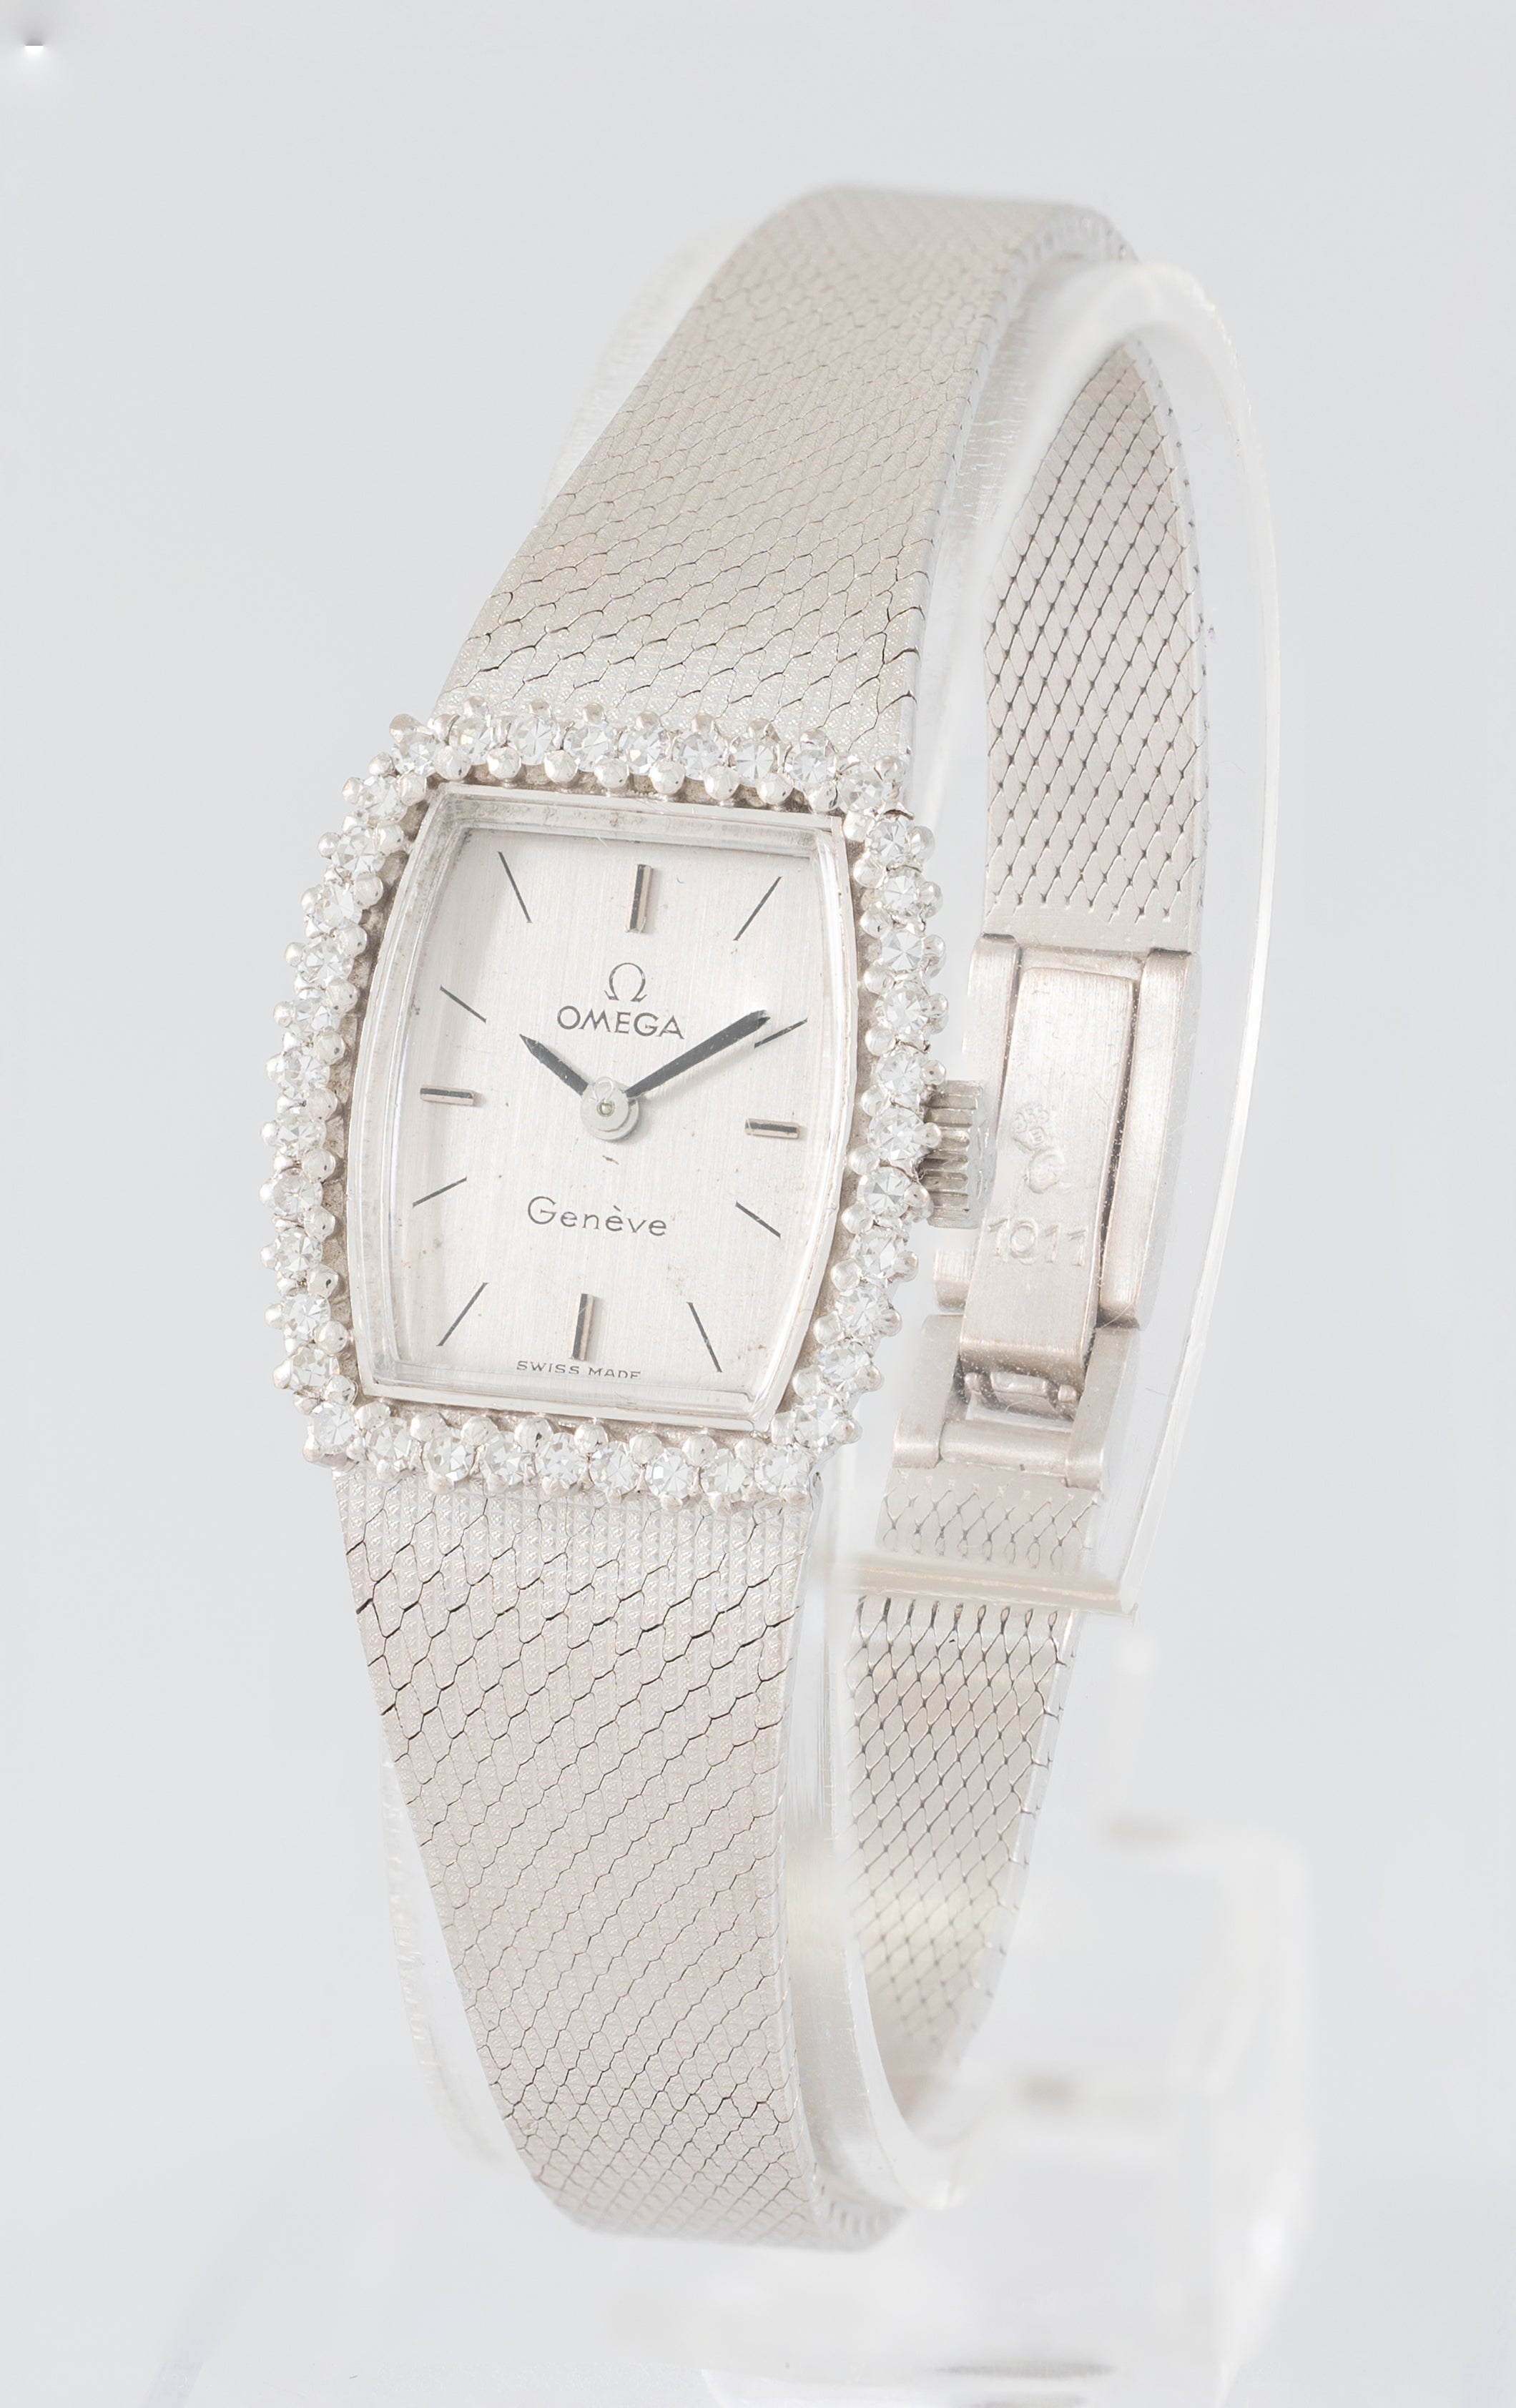 Omega Geneve White Gold 18k and Diamonds 0.4 ct Square Dial